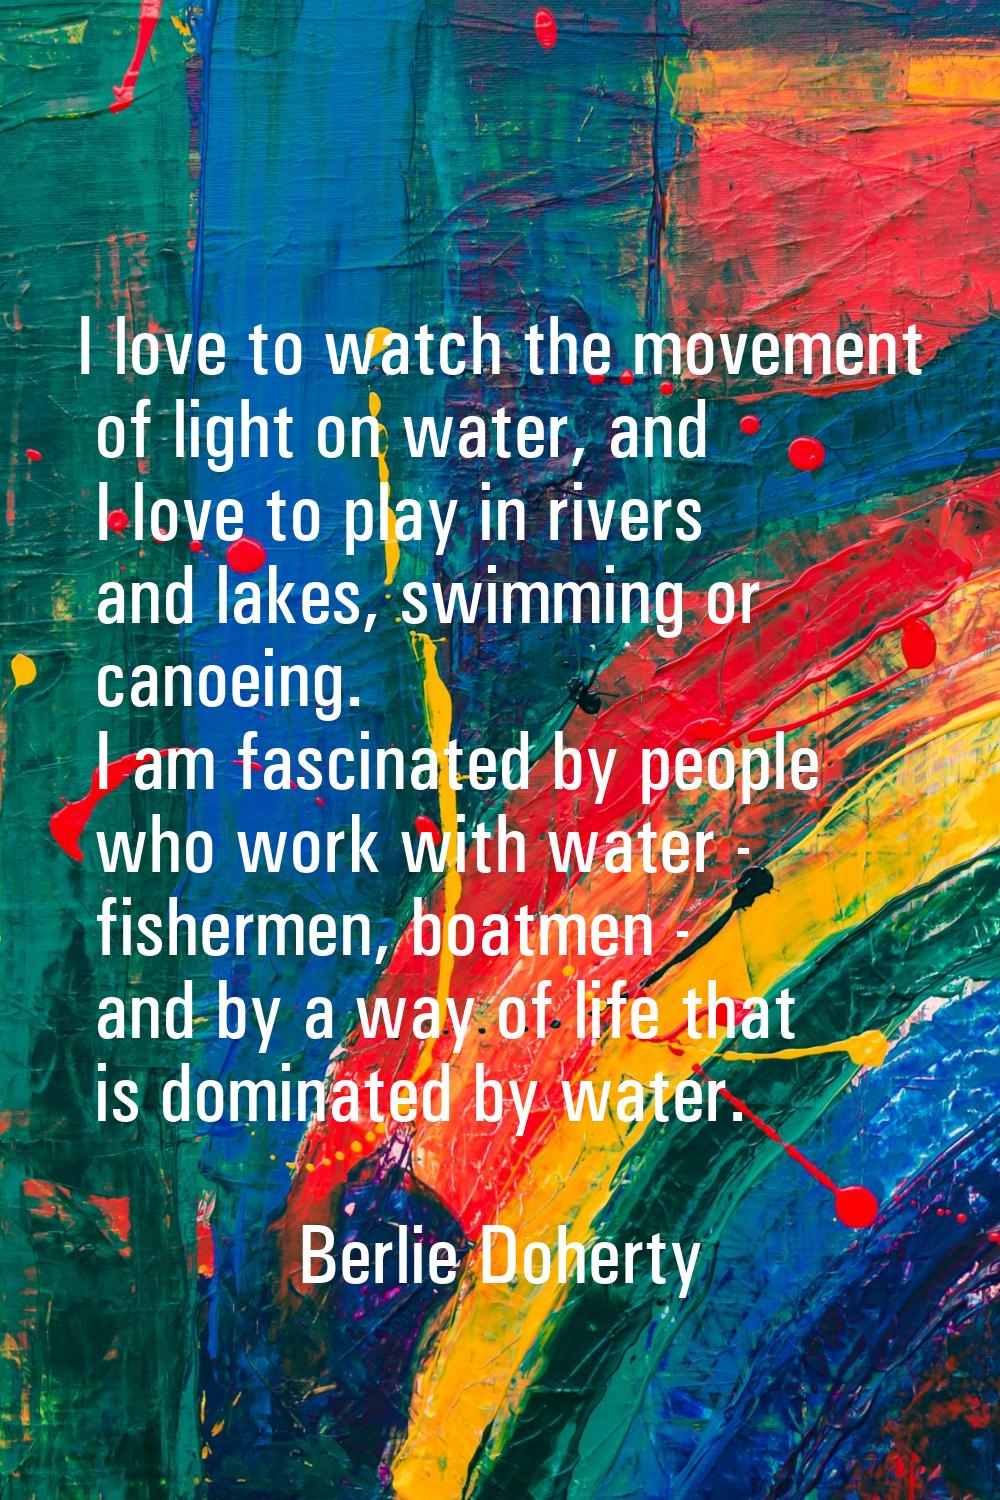 I love to watch the movement of light on water, and I love to play in rivers and lakes, swimming or